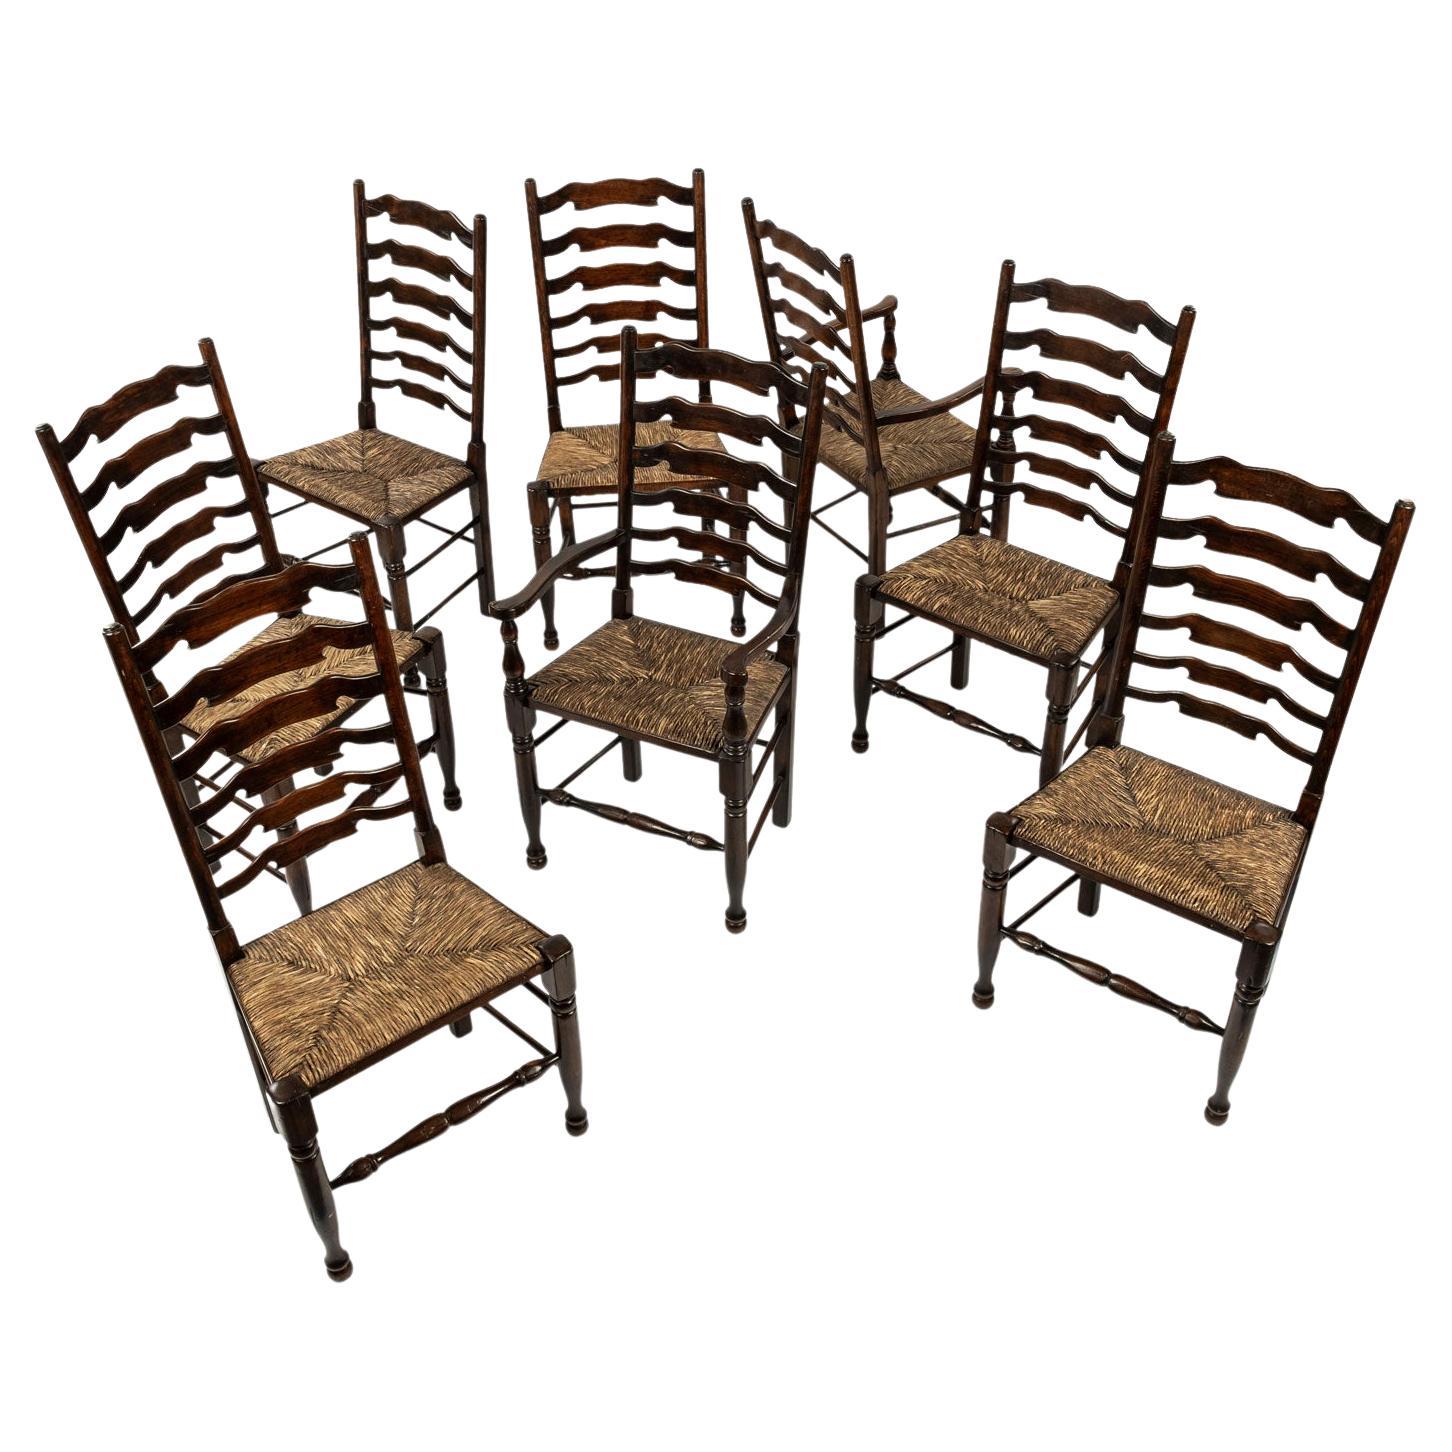 Set of Eight Vintage Ladderback Chairs